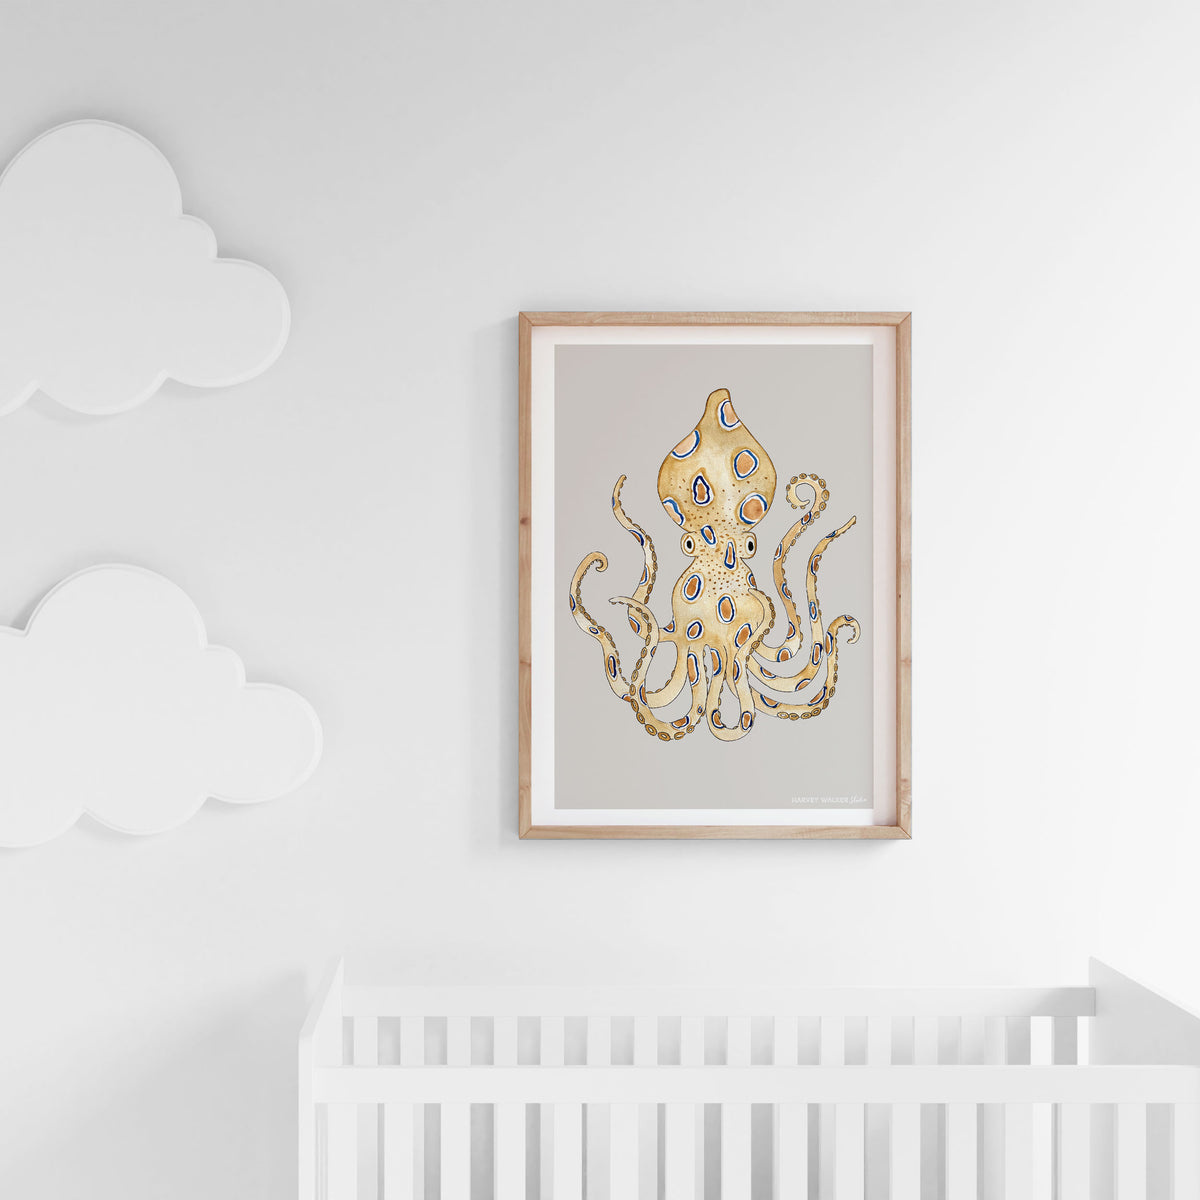 Professionally framed in Australian Oak, this fine art print has been hand watercolored in a neutral palette. Painted with watercolours, this beautiful print is perfect for a kids nursery as shown here in a white baby nursery above a white cot and cloud lights.